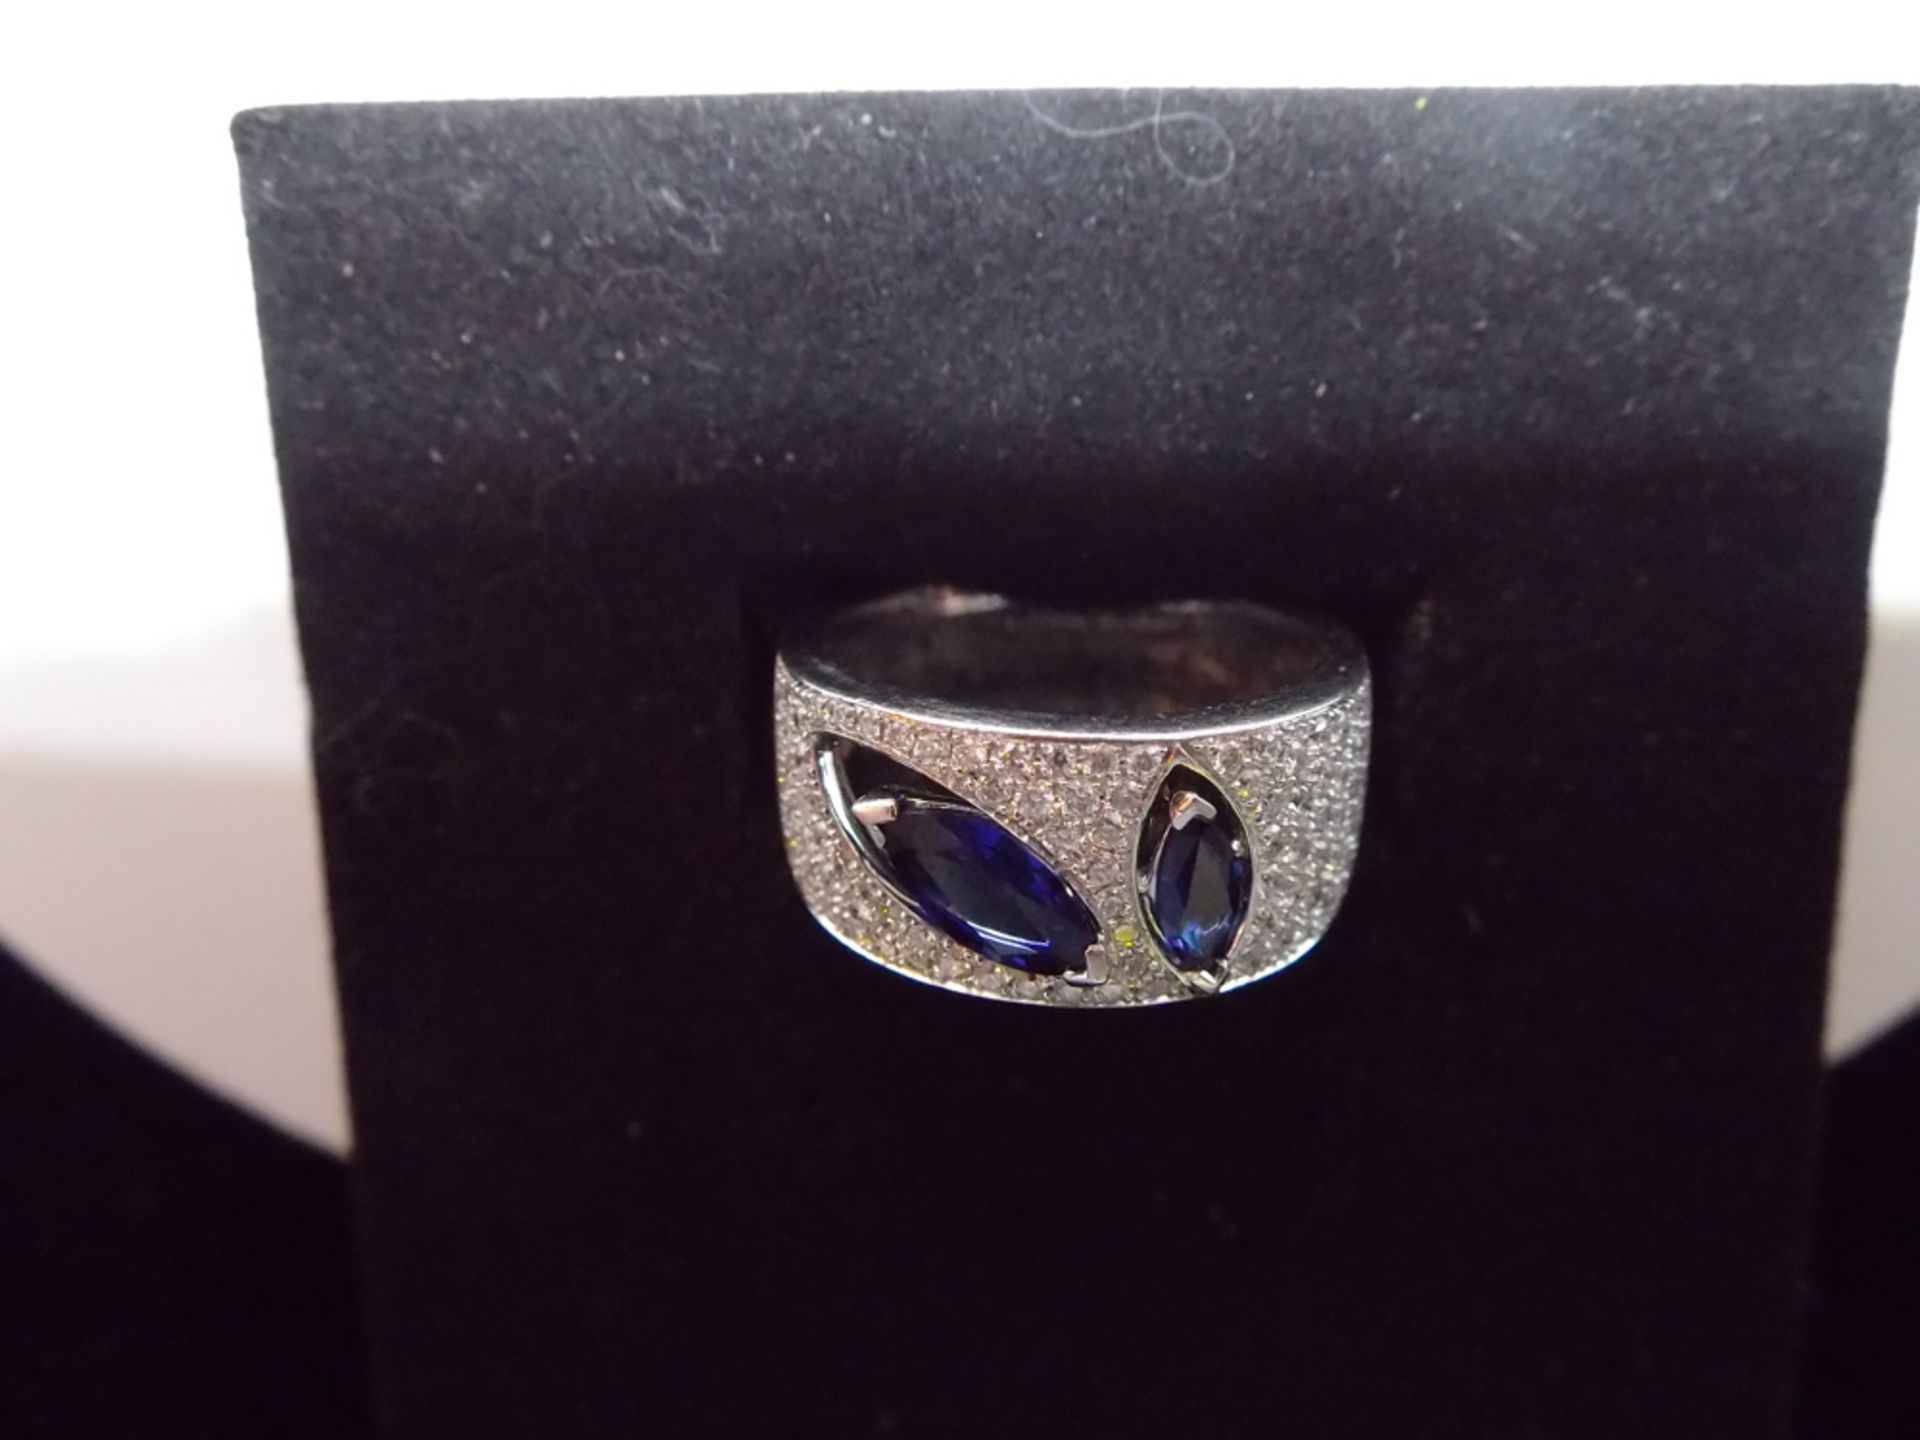 18CT White Gold and Sapphire ring - Image 2 of 4